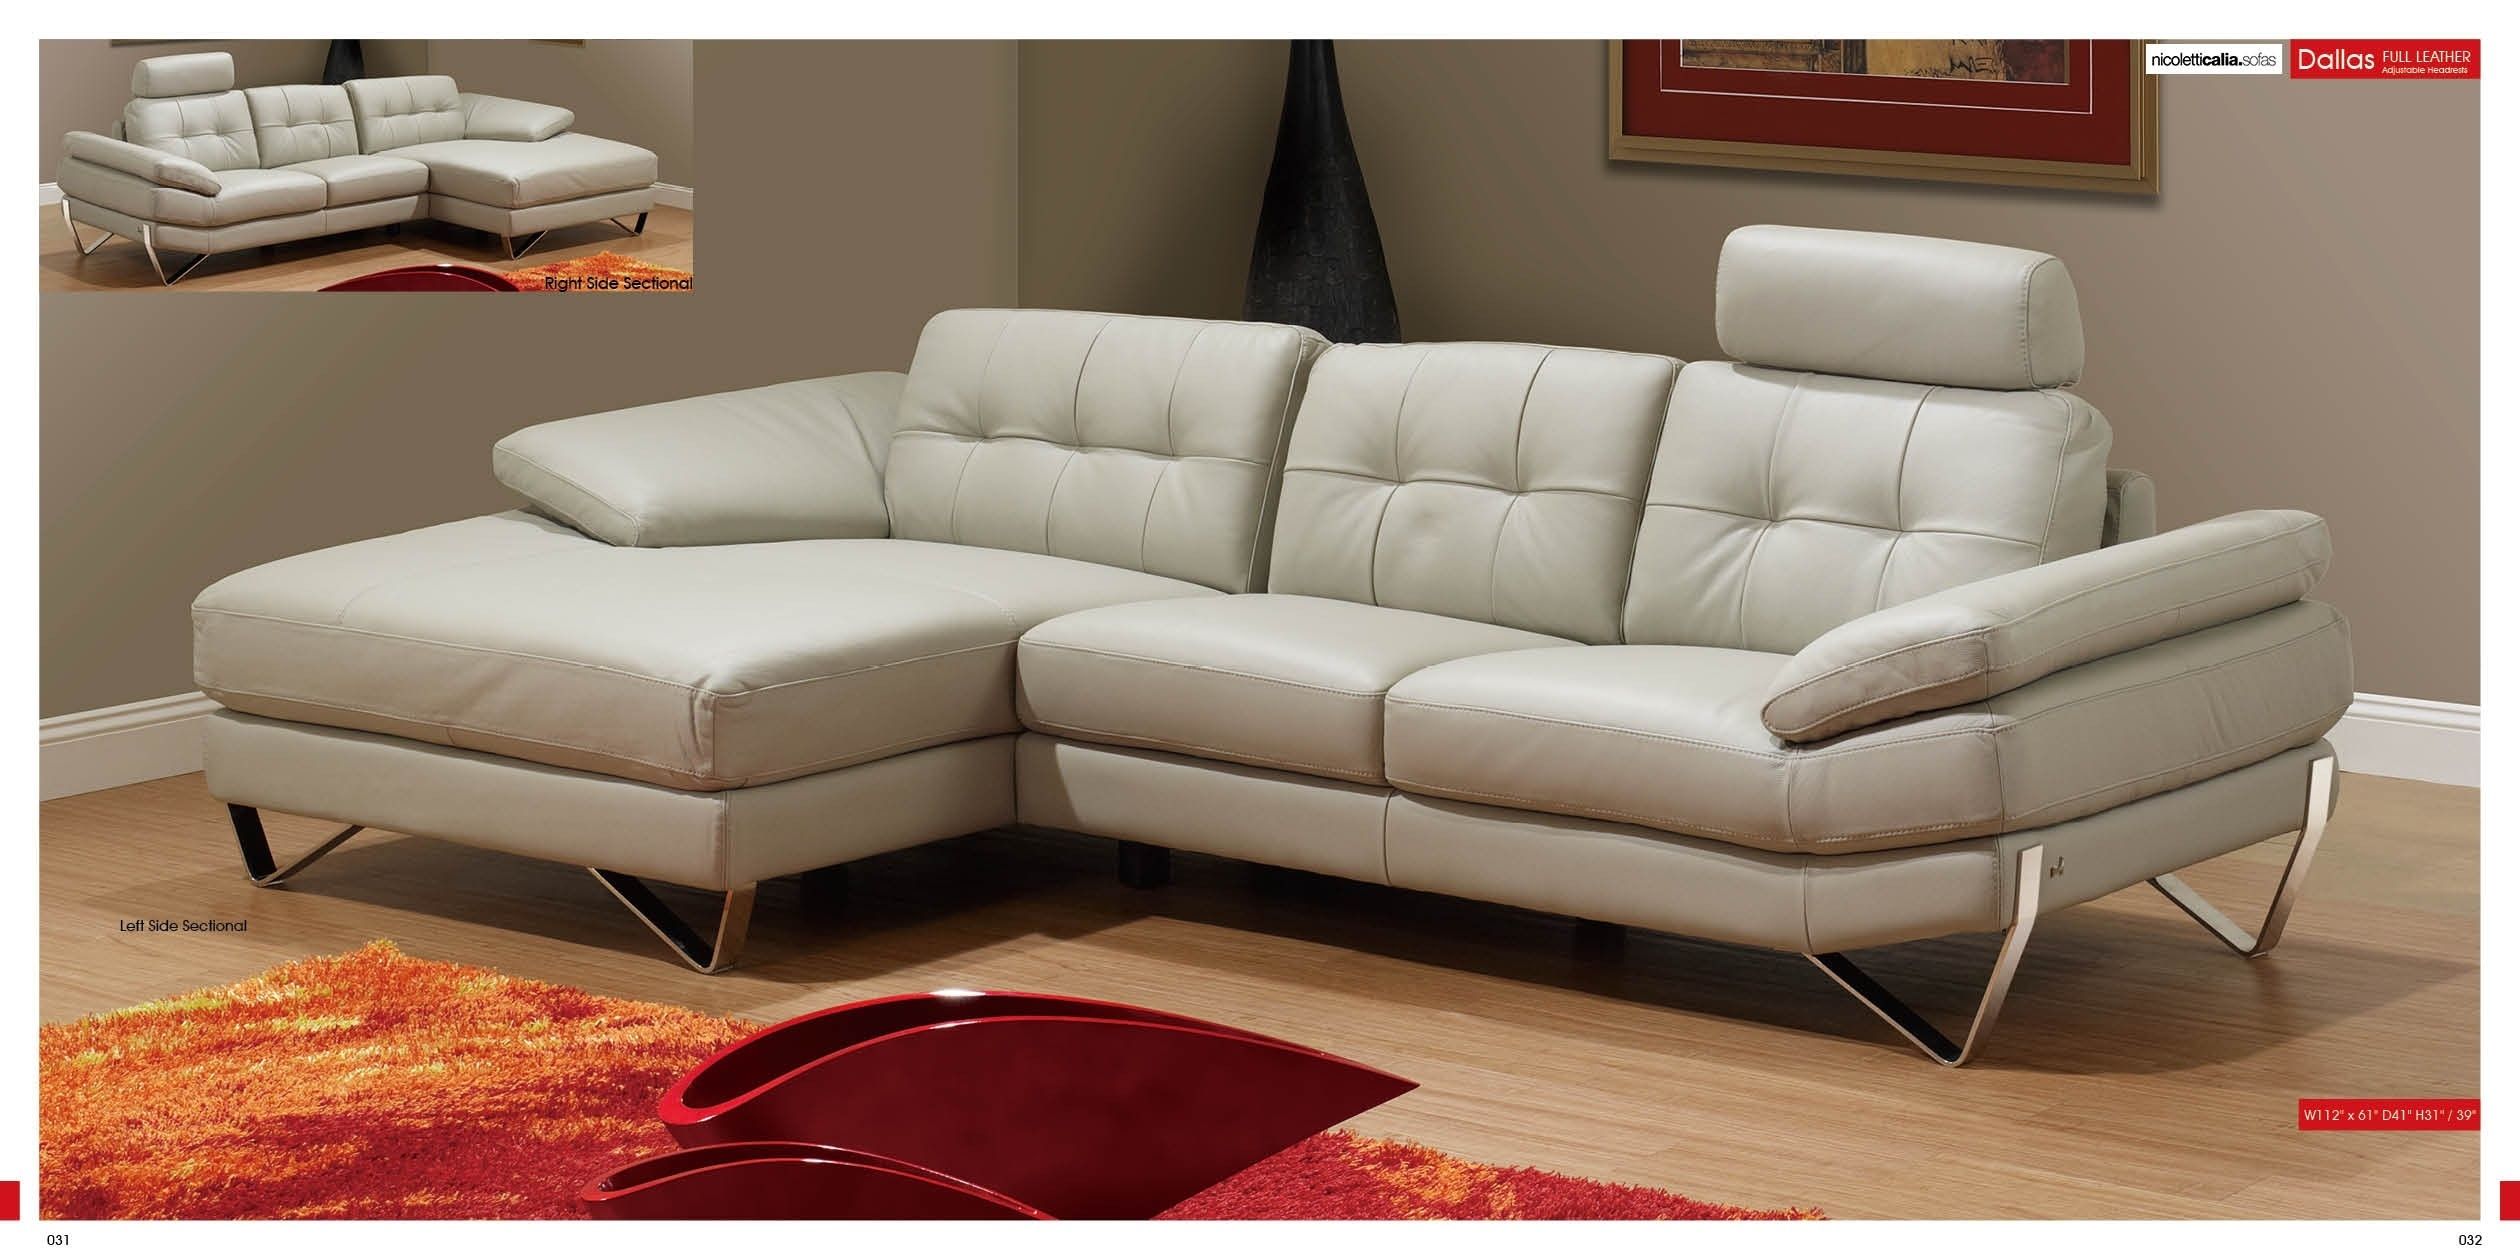 Furniture & Sofa: Havertys Frisco | Havertys Charlotte Nc | Havertys Throughout Macon Ga Sectional Sofas (View 8 of 10)